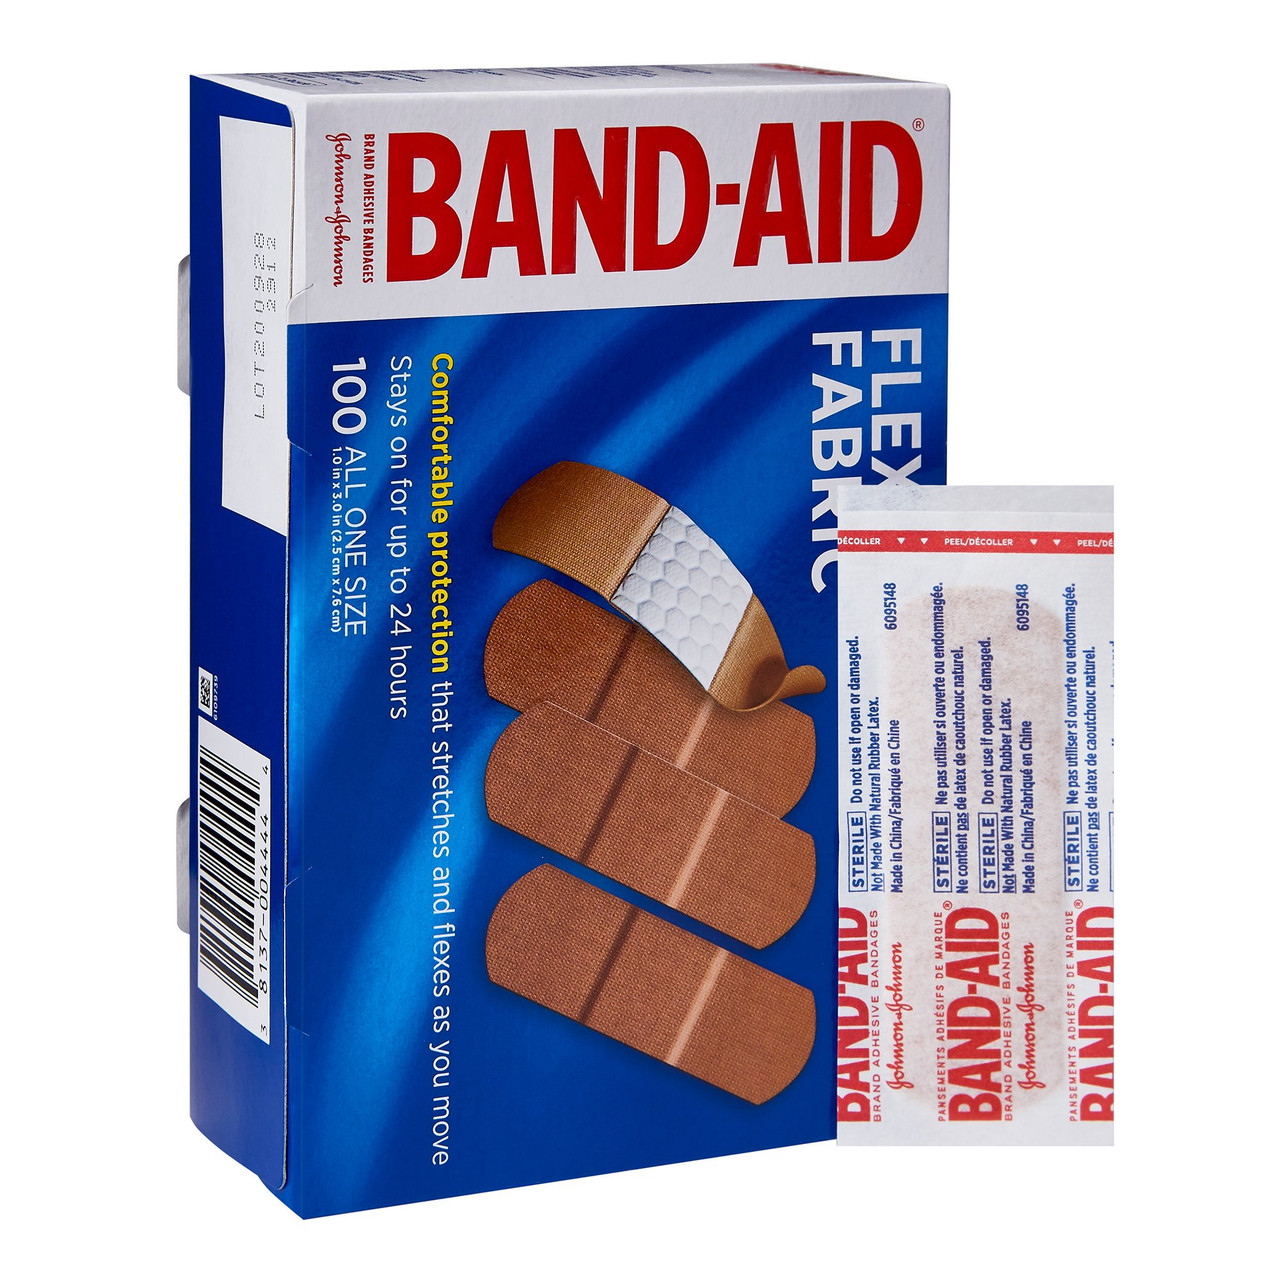 Band-Aid Adhesive Strip - Sterile, Flexible Fabric Bandage - Simply Medical